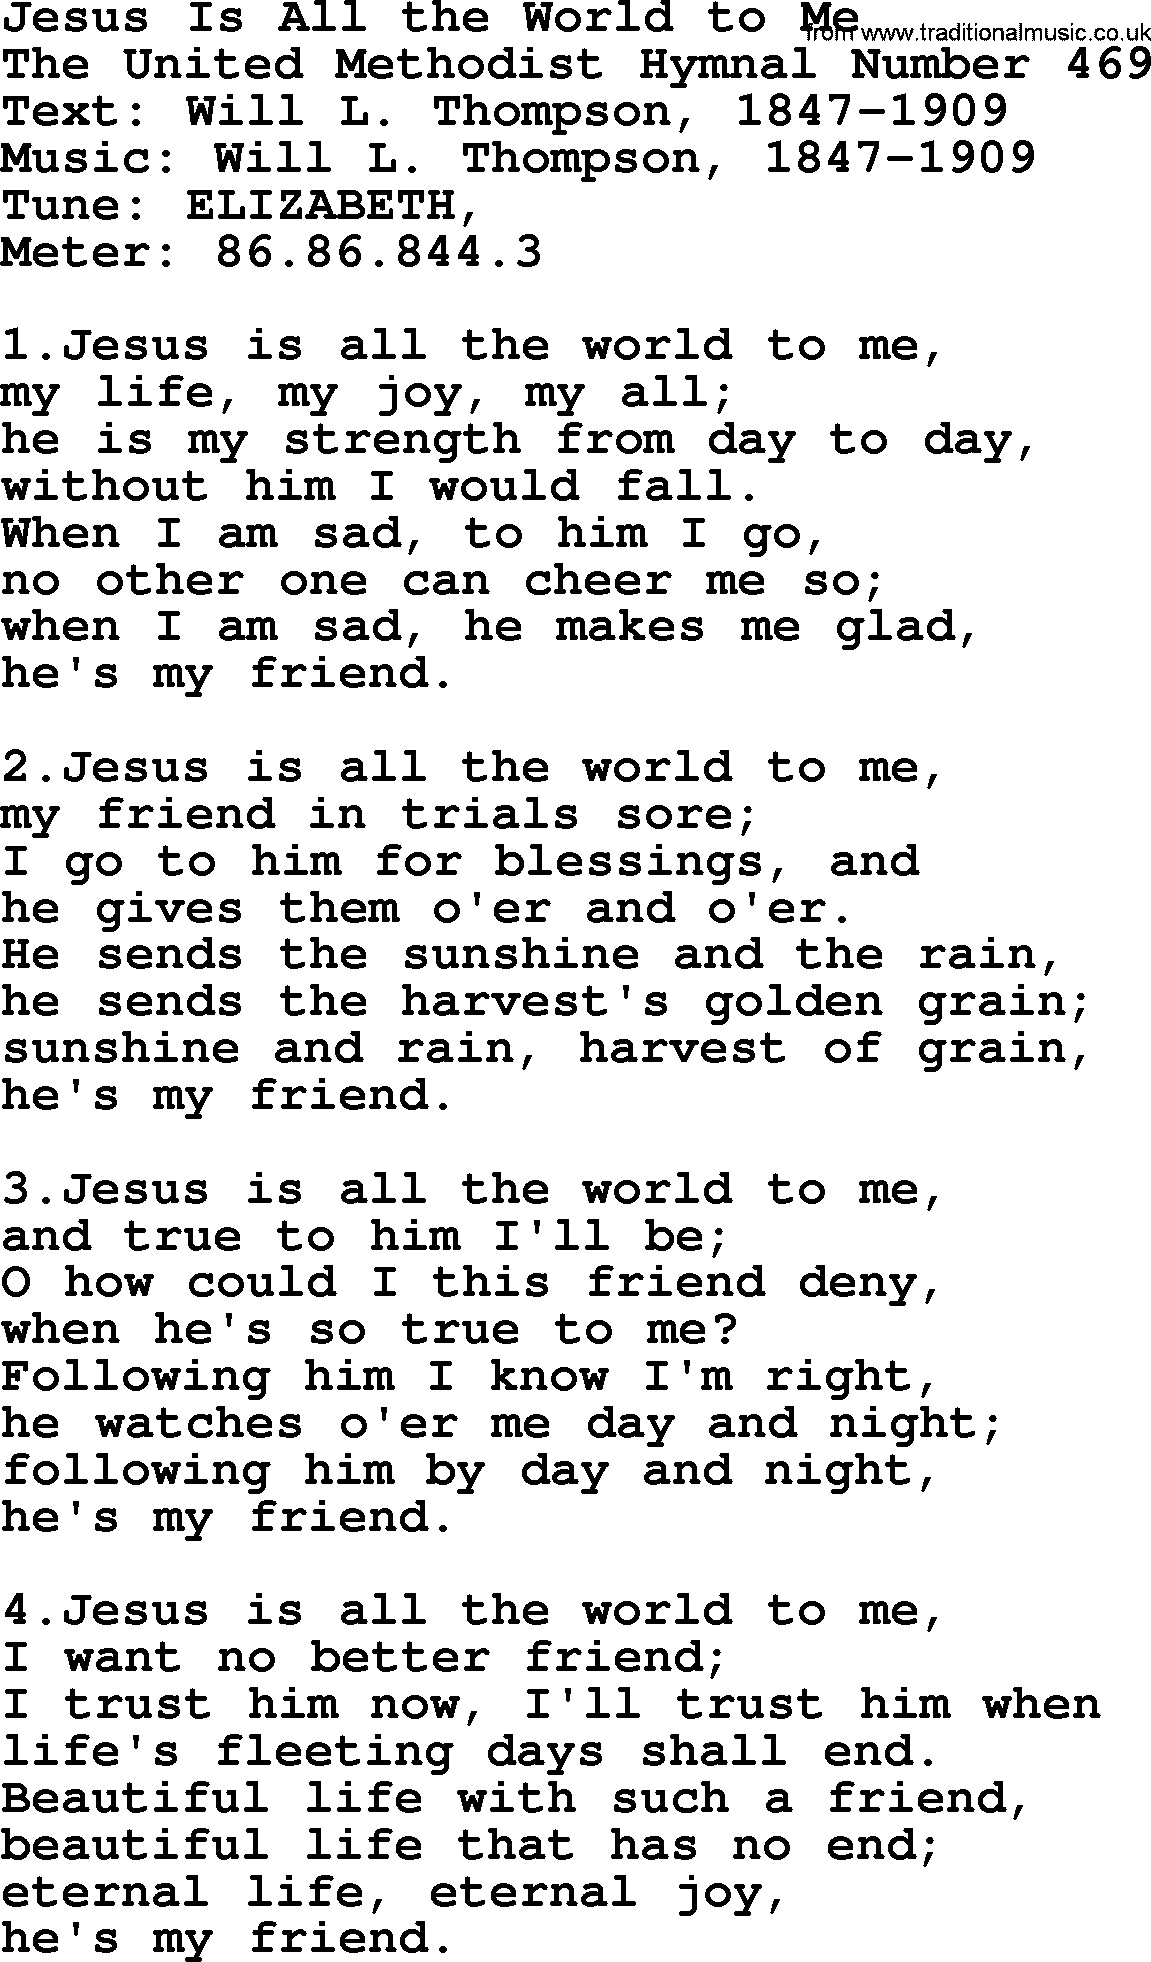 Ascensiontide Hynms collection, Hymn: Jesus Is All The World To Me, lyrics and PDF